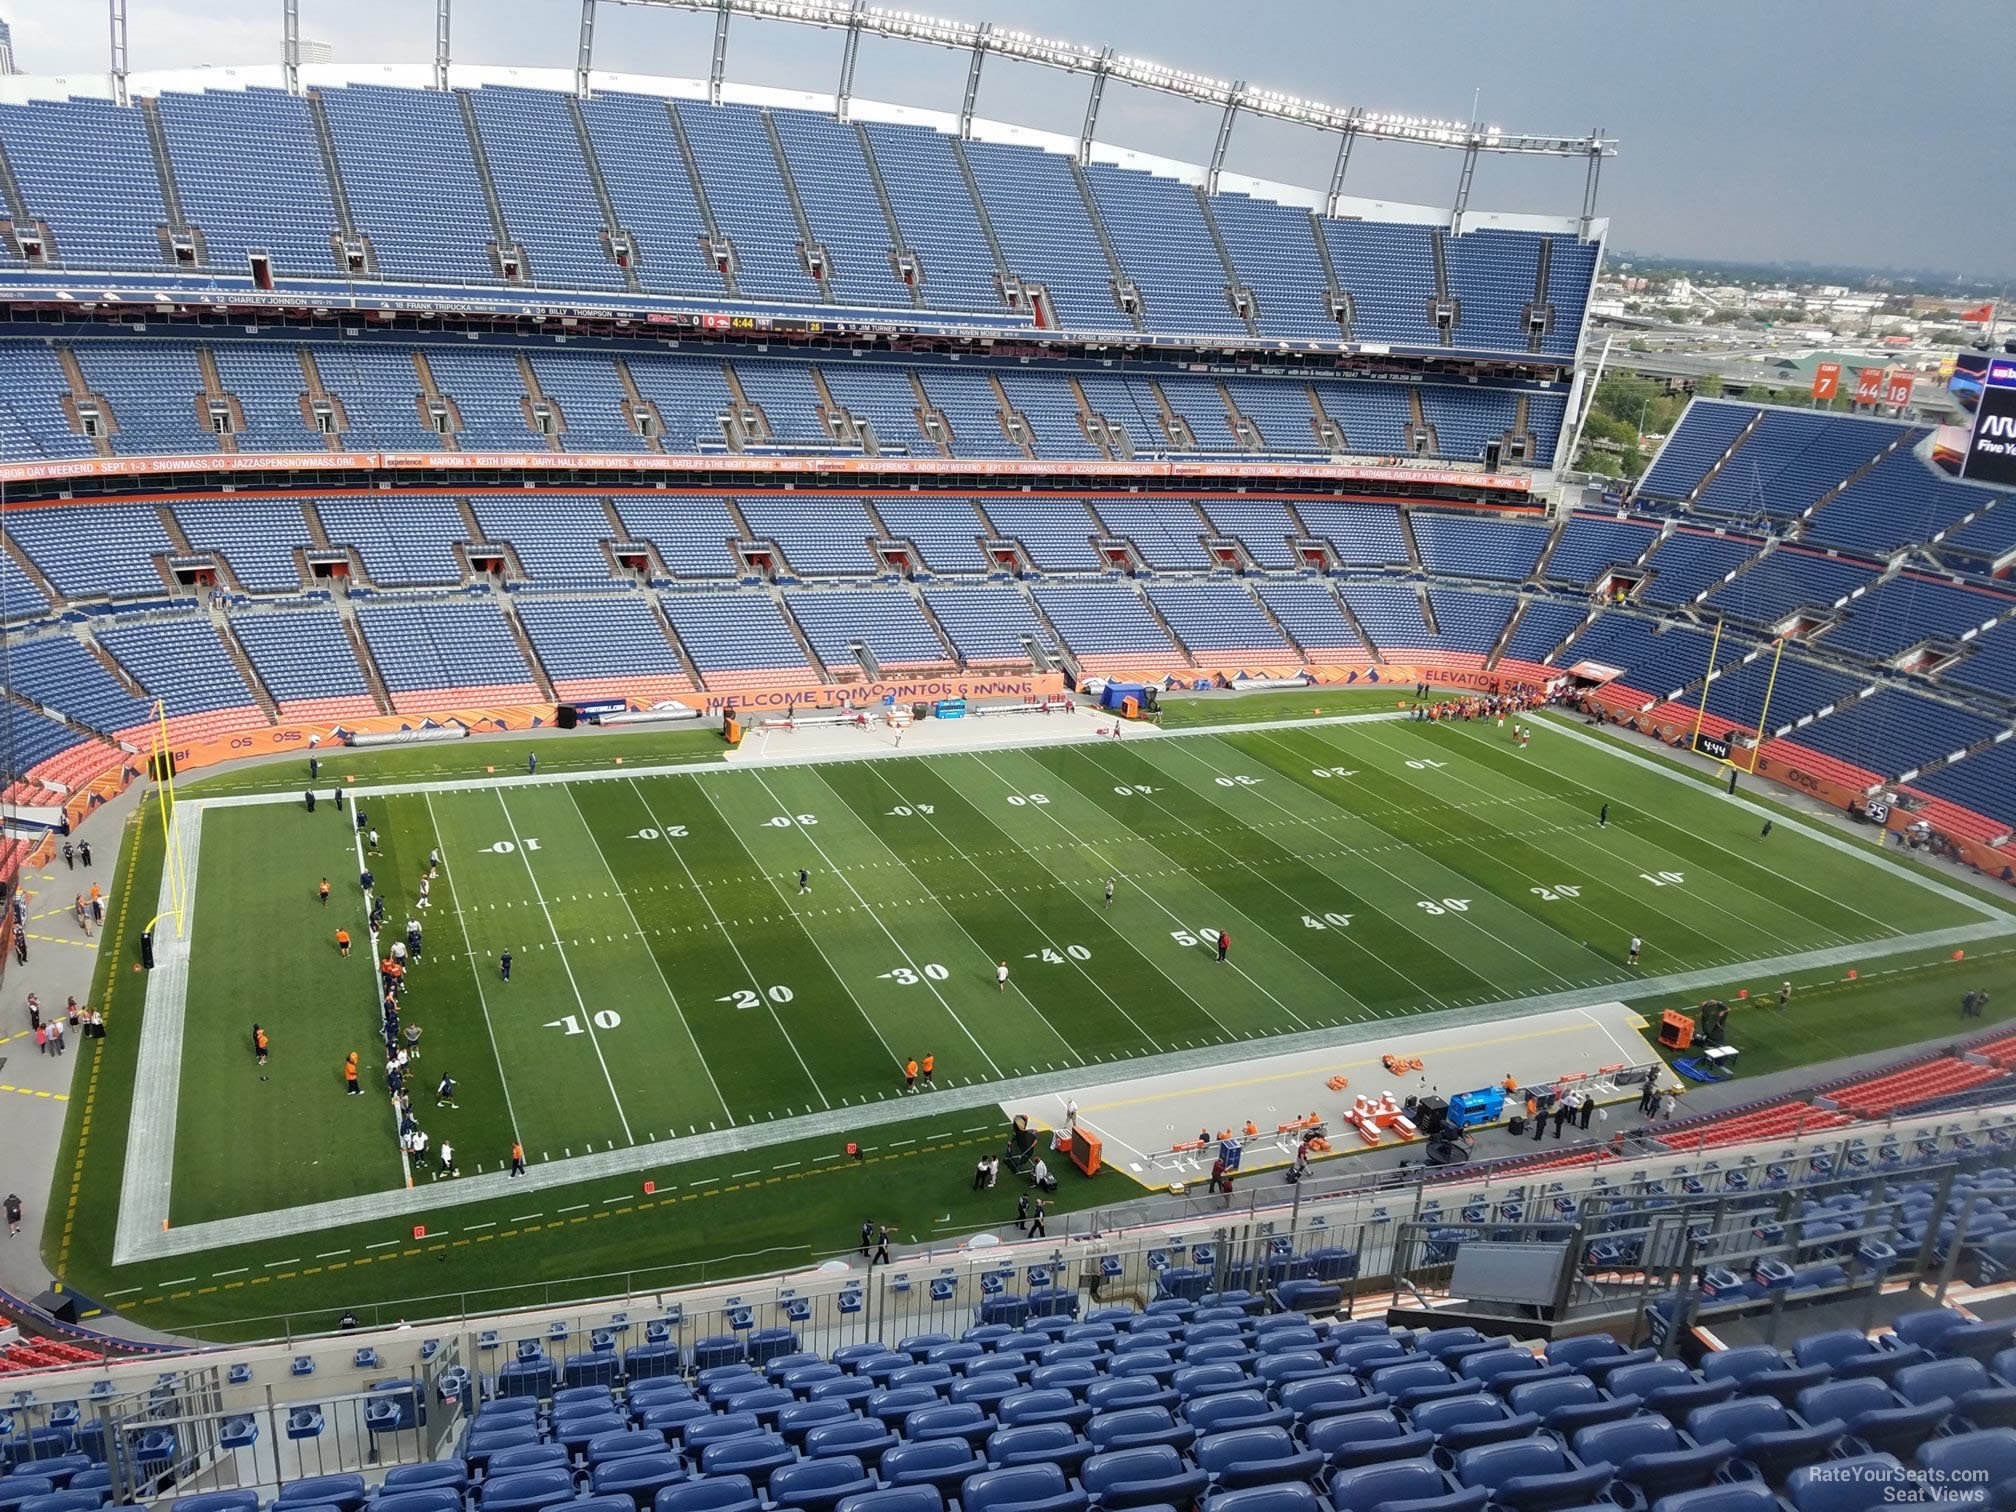 section 512, row 16 seat view  - empower field (at mile high)